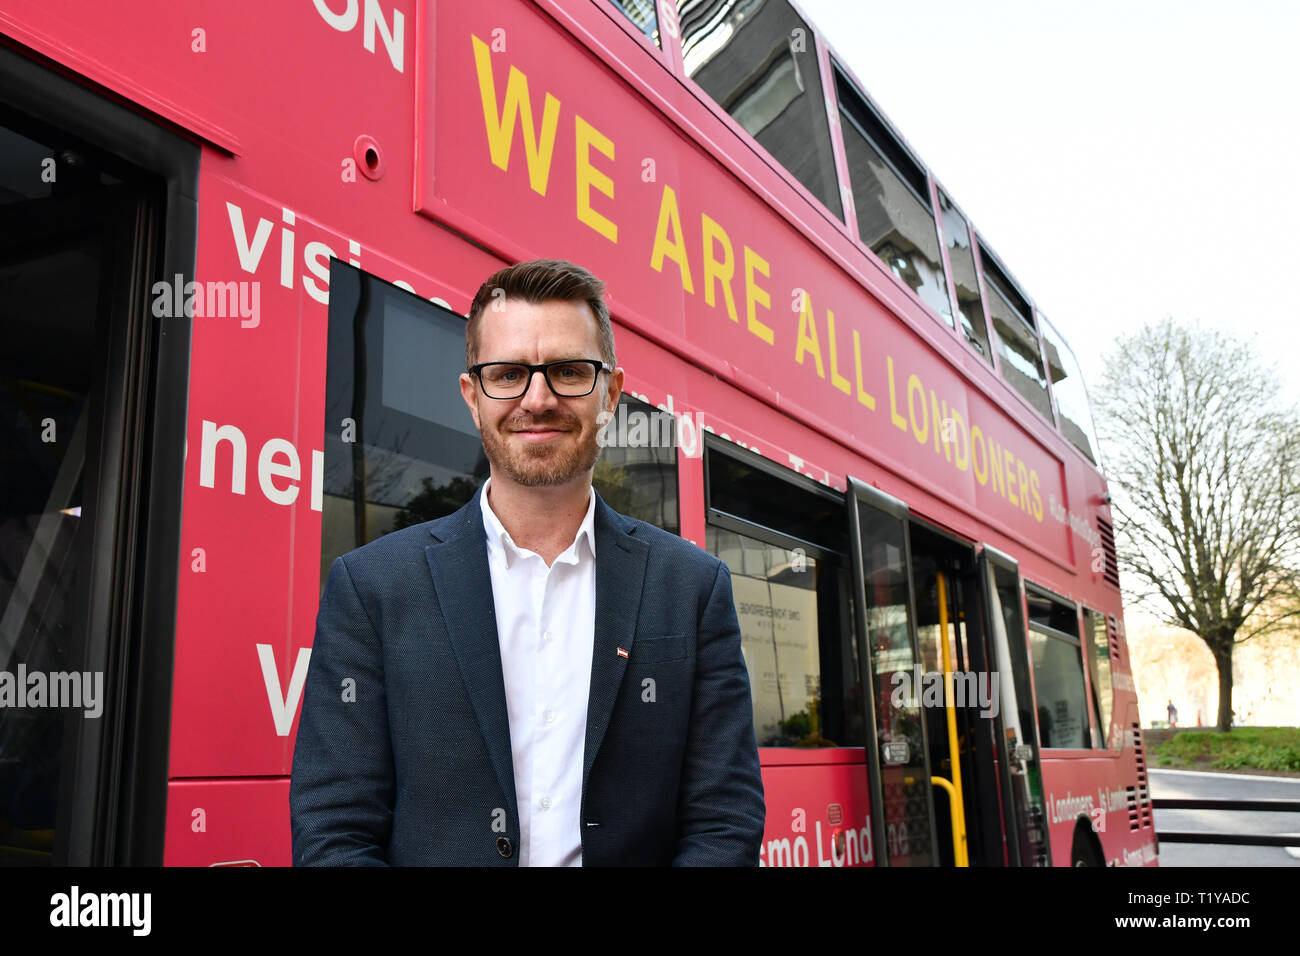 London, UK. 29th March, 2019. Philipp Ertl from Austria attend The Mayor of London, Sadiq Khan, launch a branded ‘We are all Londoners' bus as it begins a four-day ‘Advice Roadshow' around the capital. The bus will visit locations in areas with high numbers of European nationals, offering them guidance on how to apply for Settled to Status to remain in the UK following Brexit on 29 March 2019, London, UK. Credit: Picture Capital/Alamy Live News Stock Photo